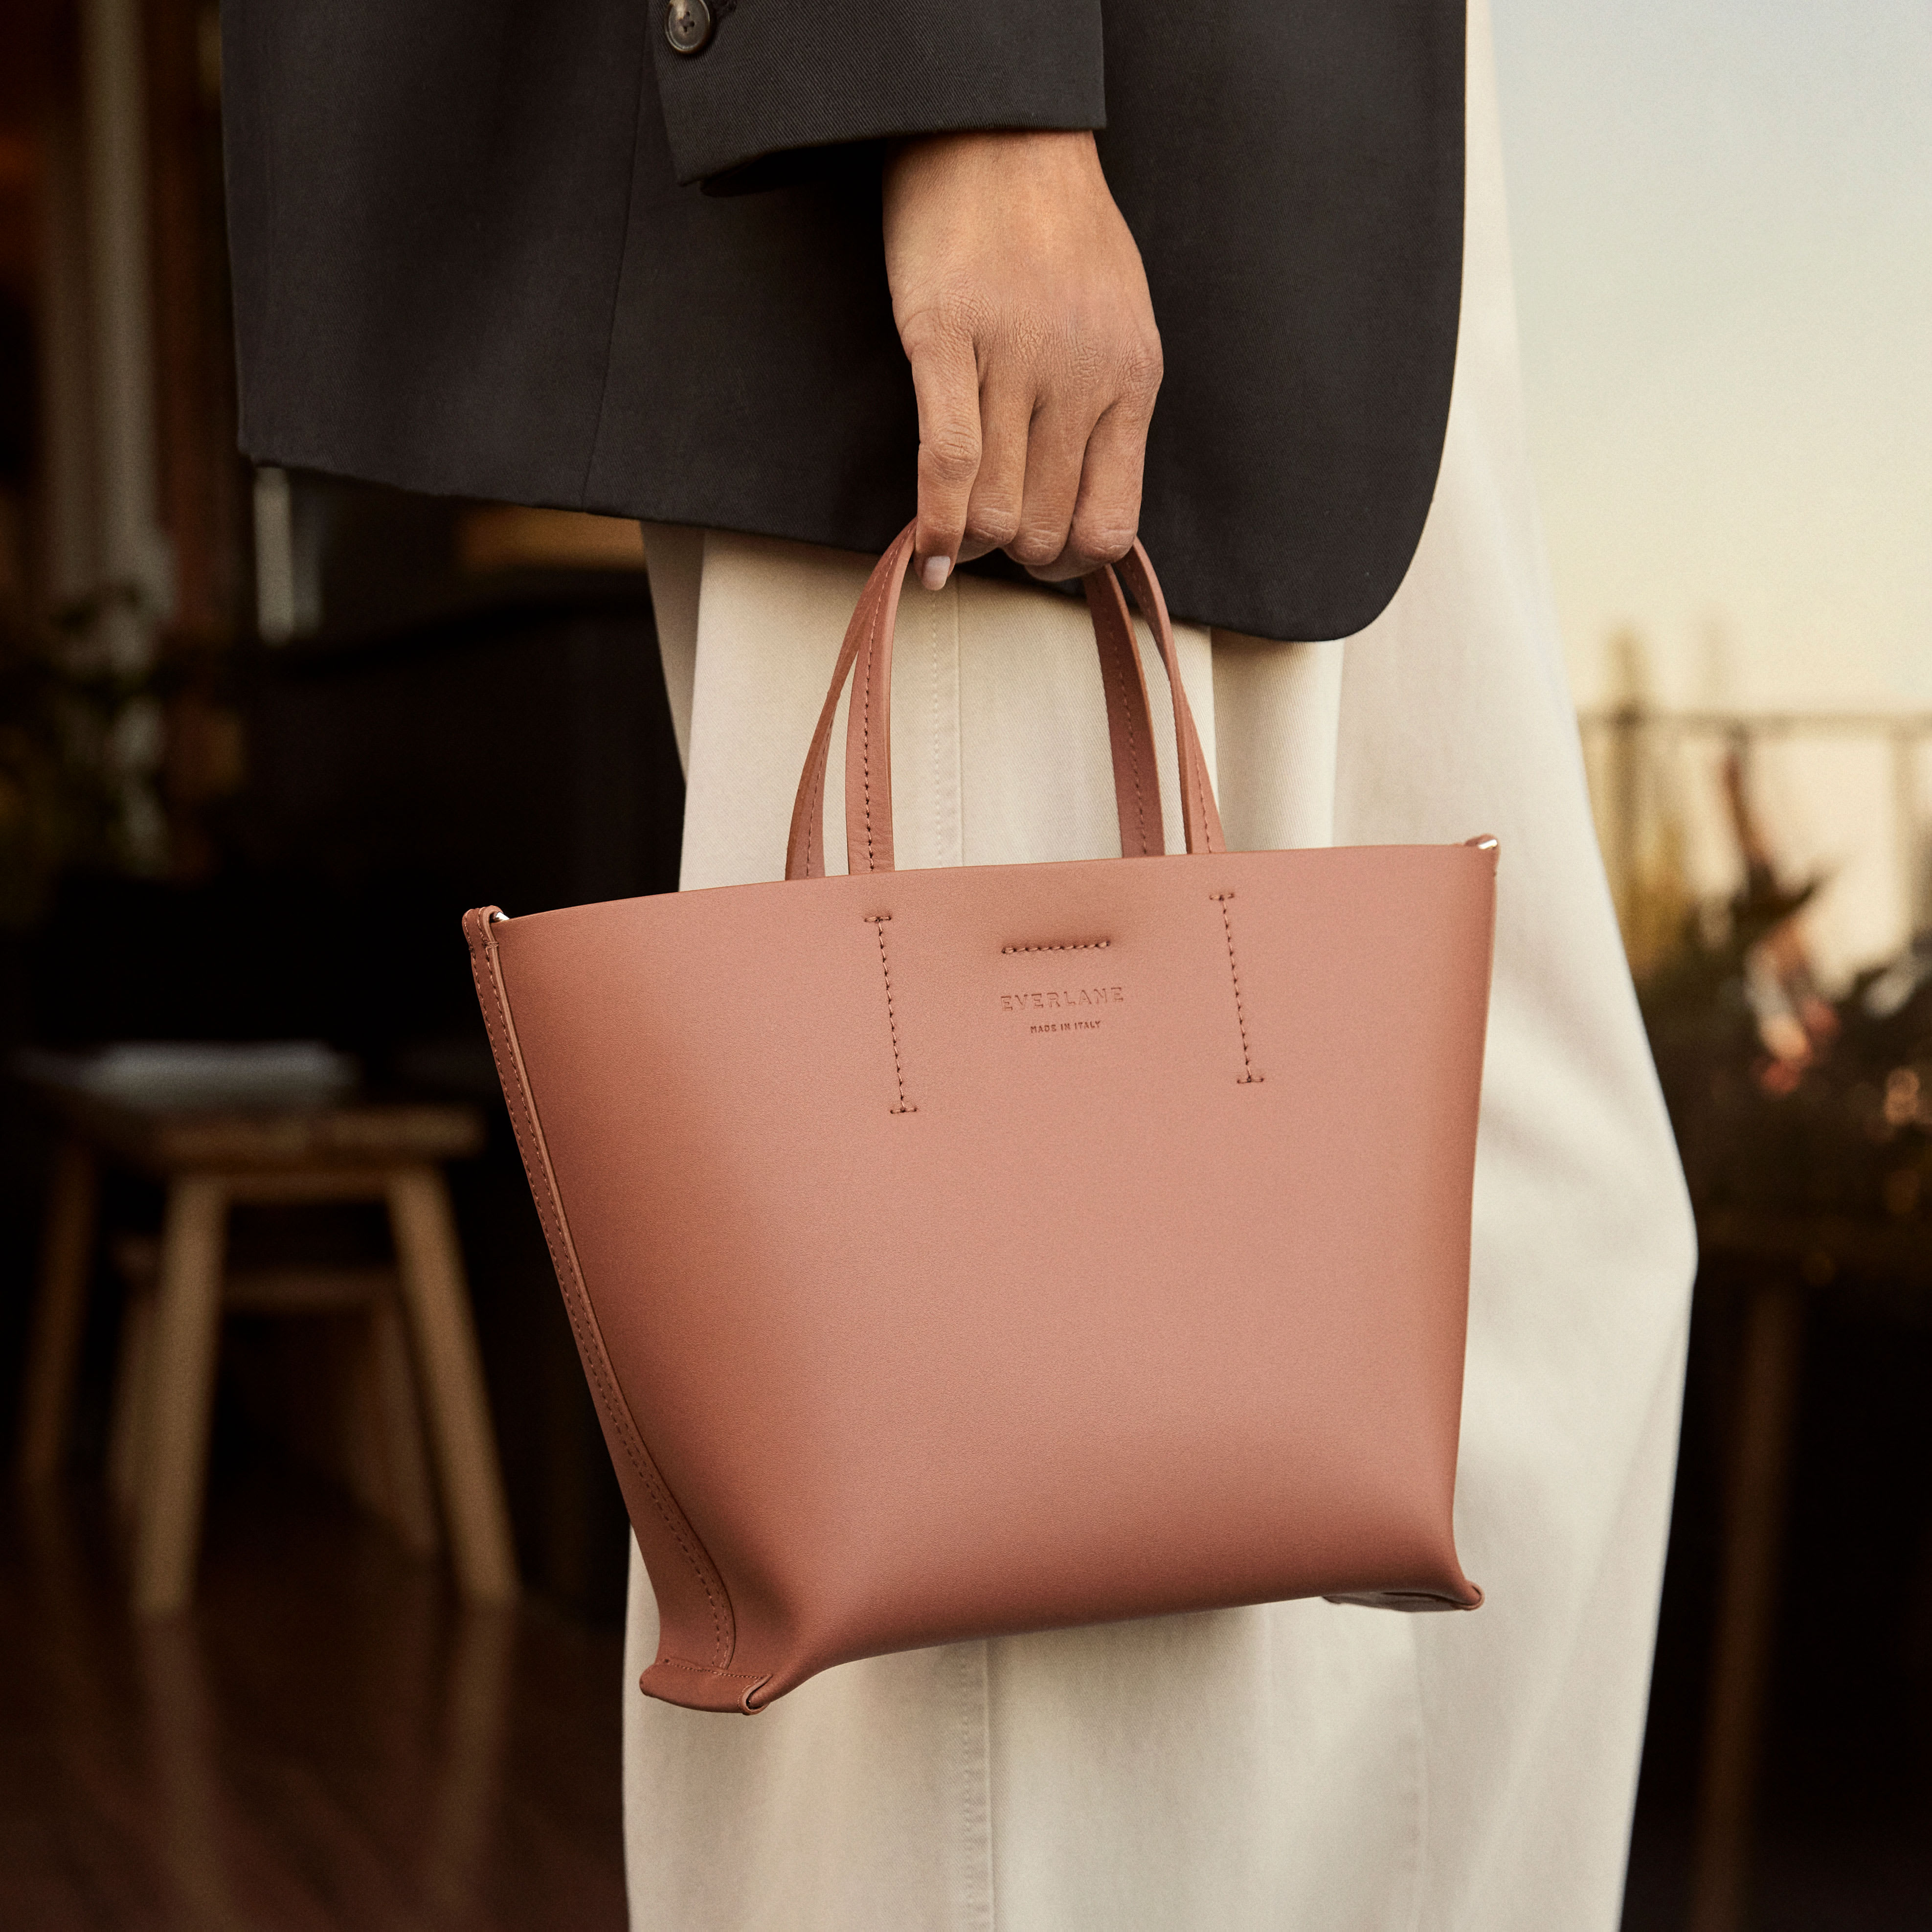 The Luxe Italian Leather Tote Black – Everlane